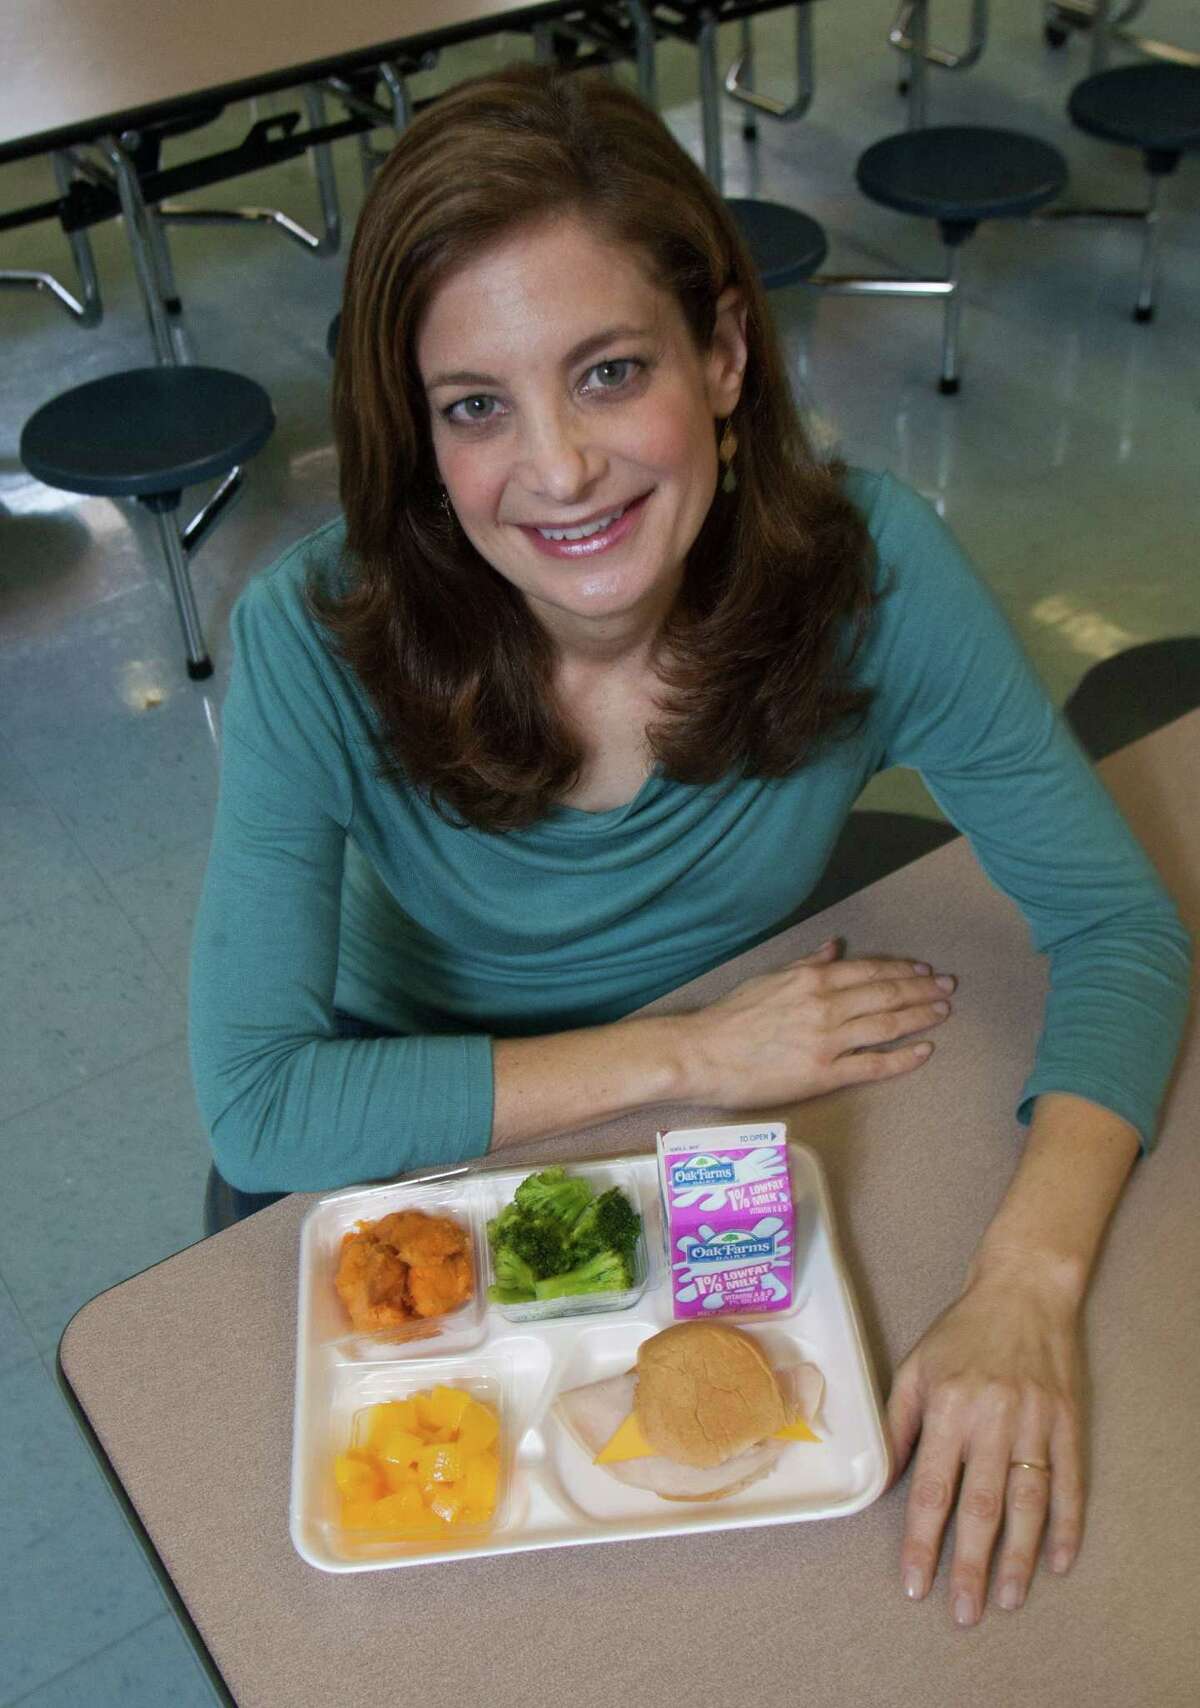 Bettina Siegel is a stay-at-home mom, blogger and freelance writer. She also serves on two Houston Independent School District committees related to food and health.